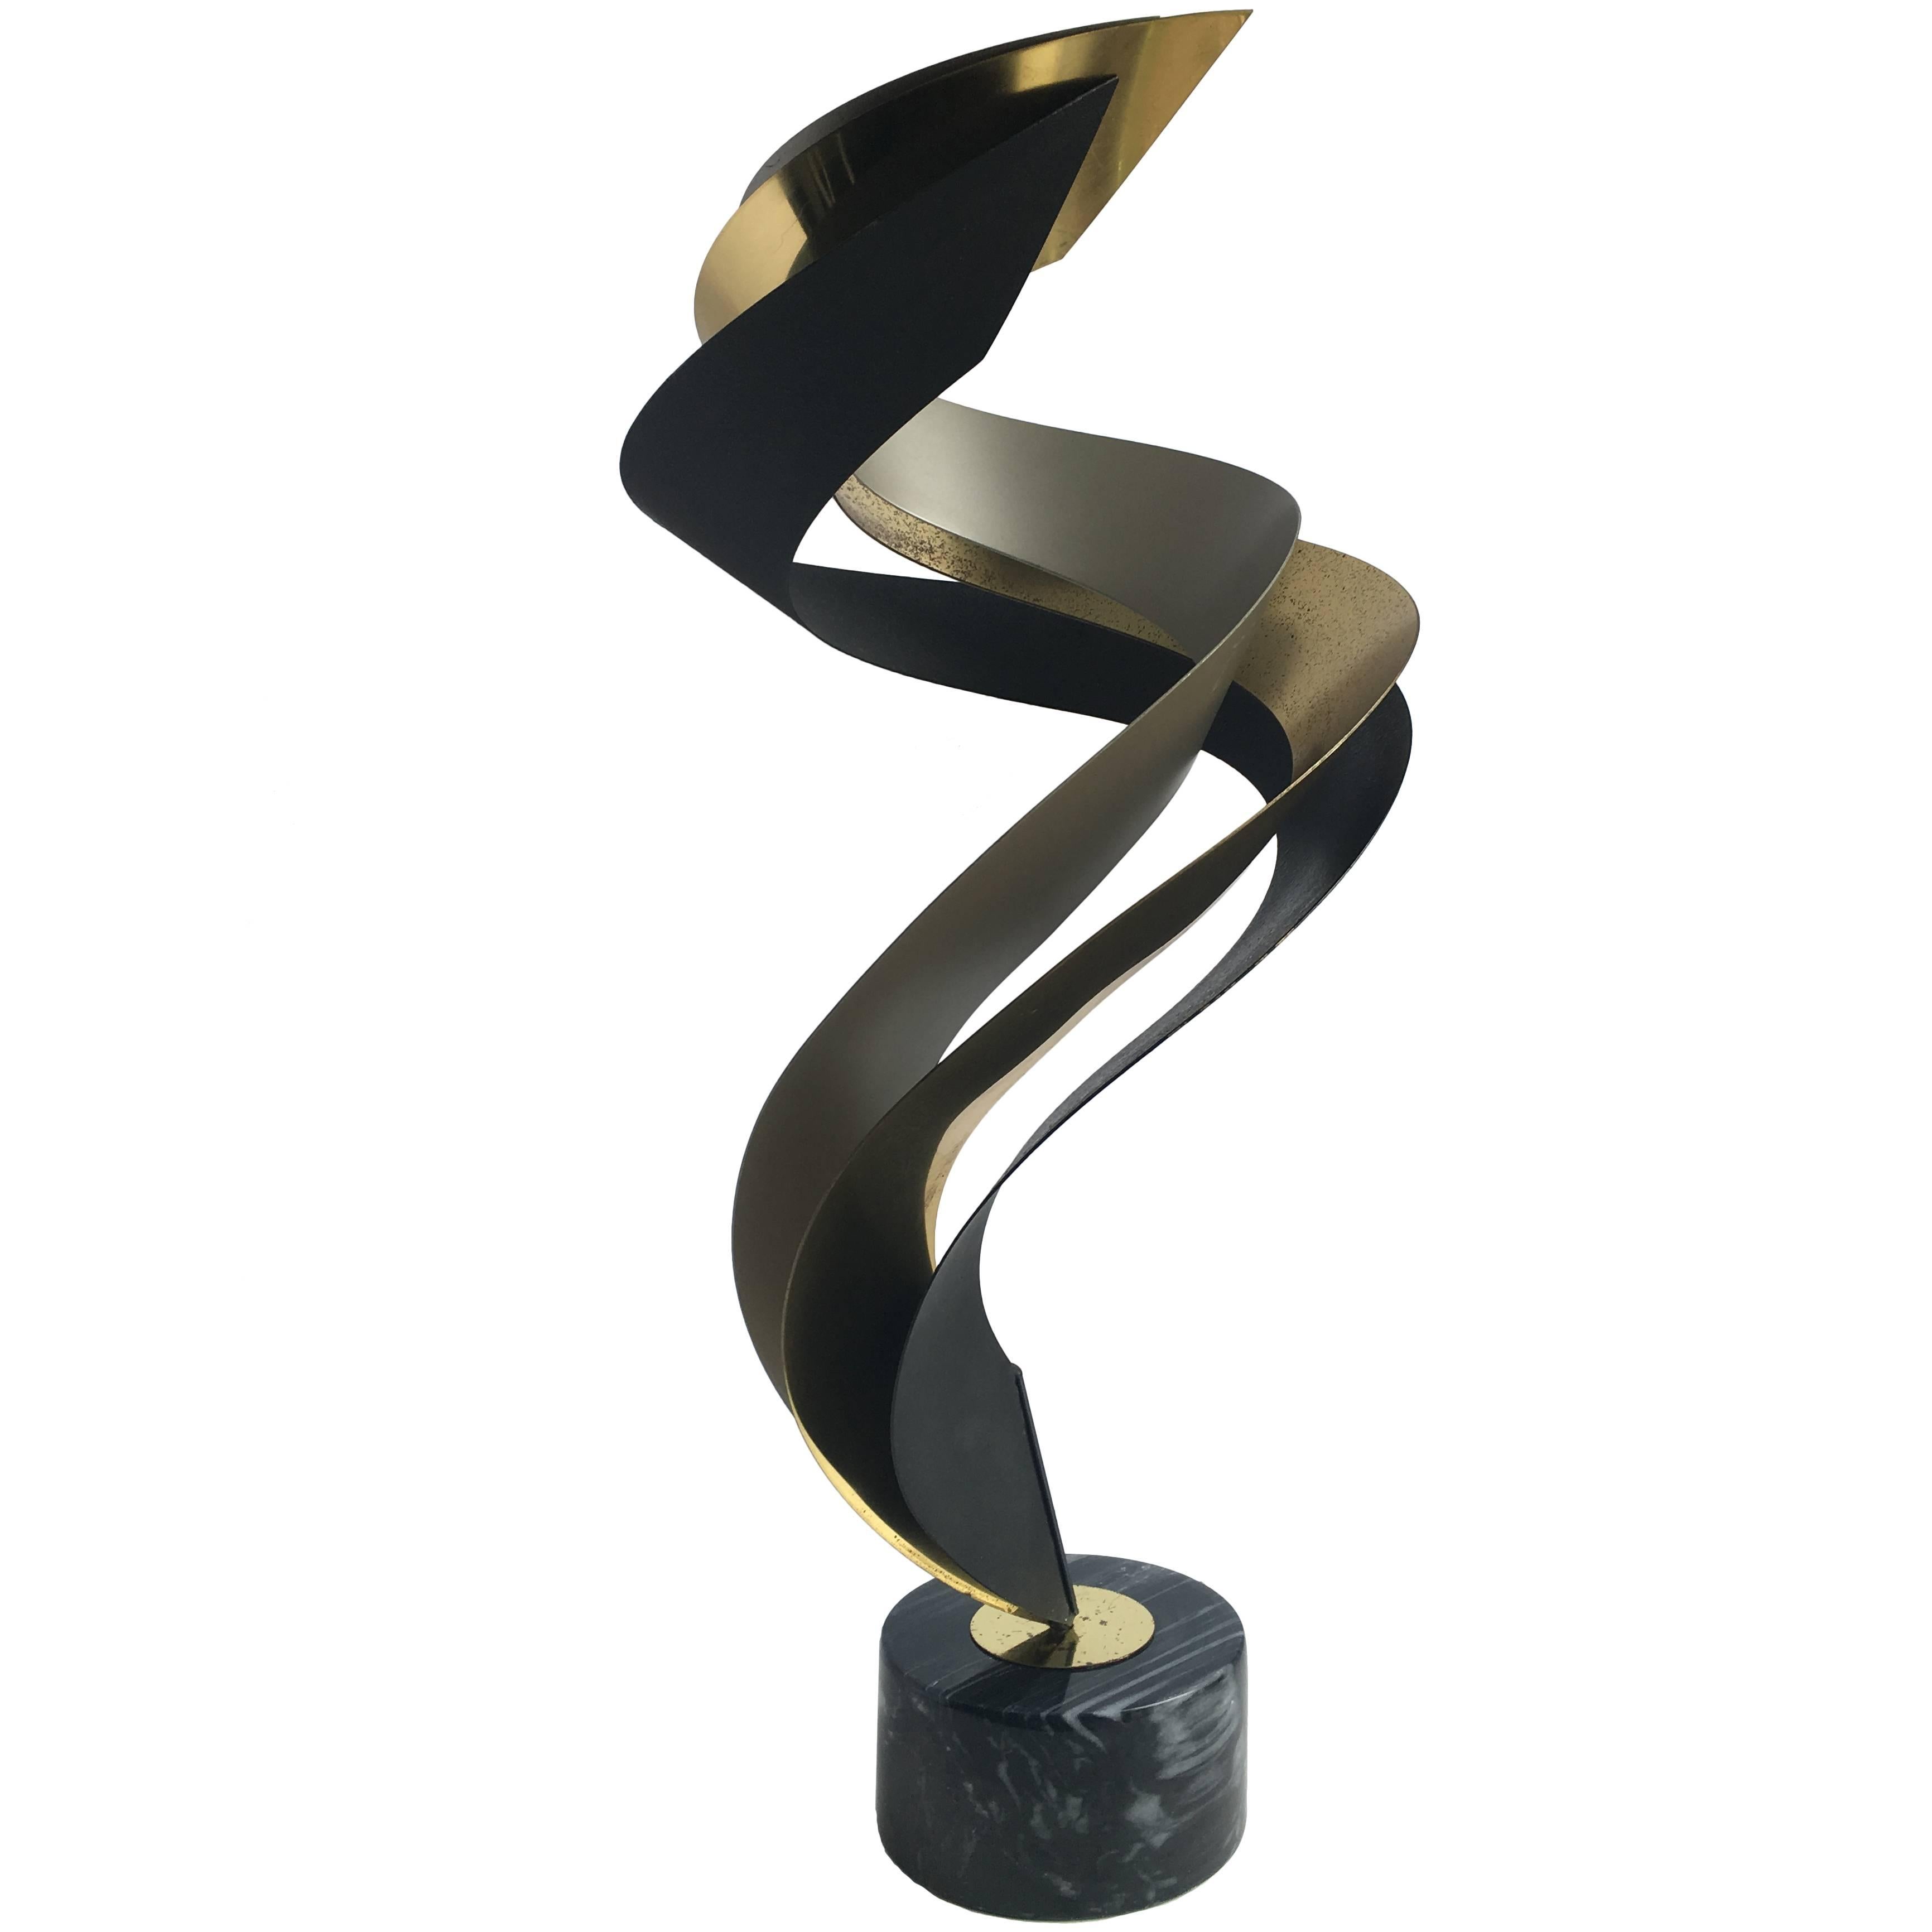 Curtis Jere Abstract Table Sculpture